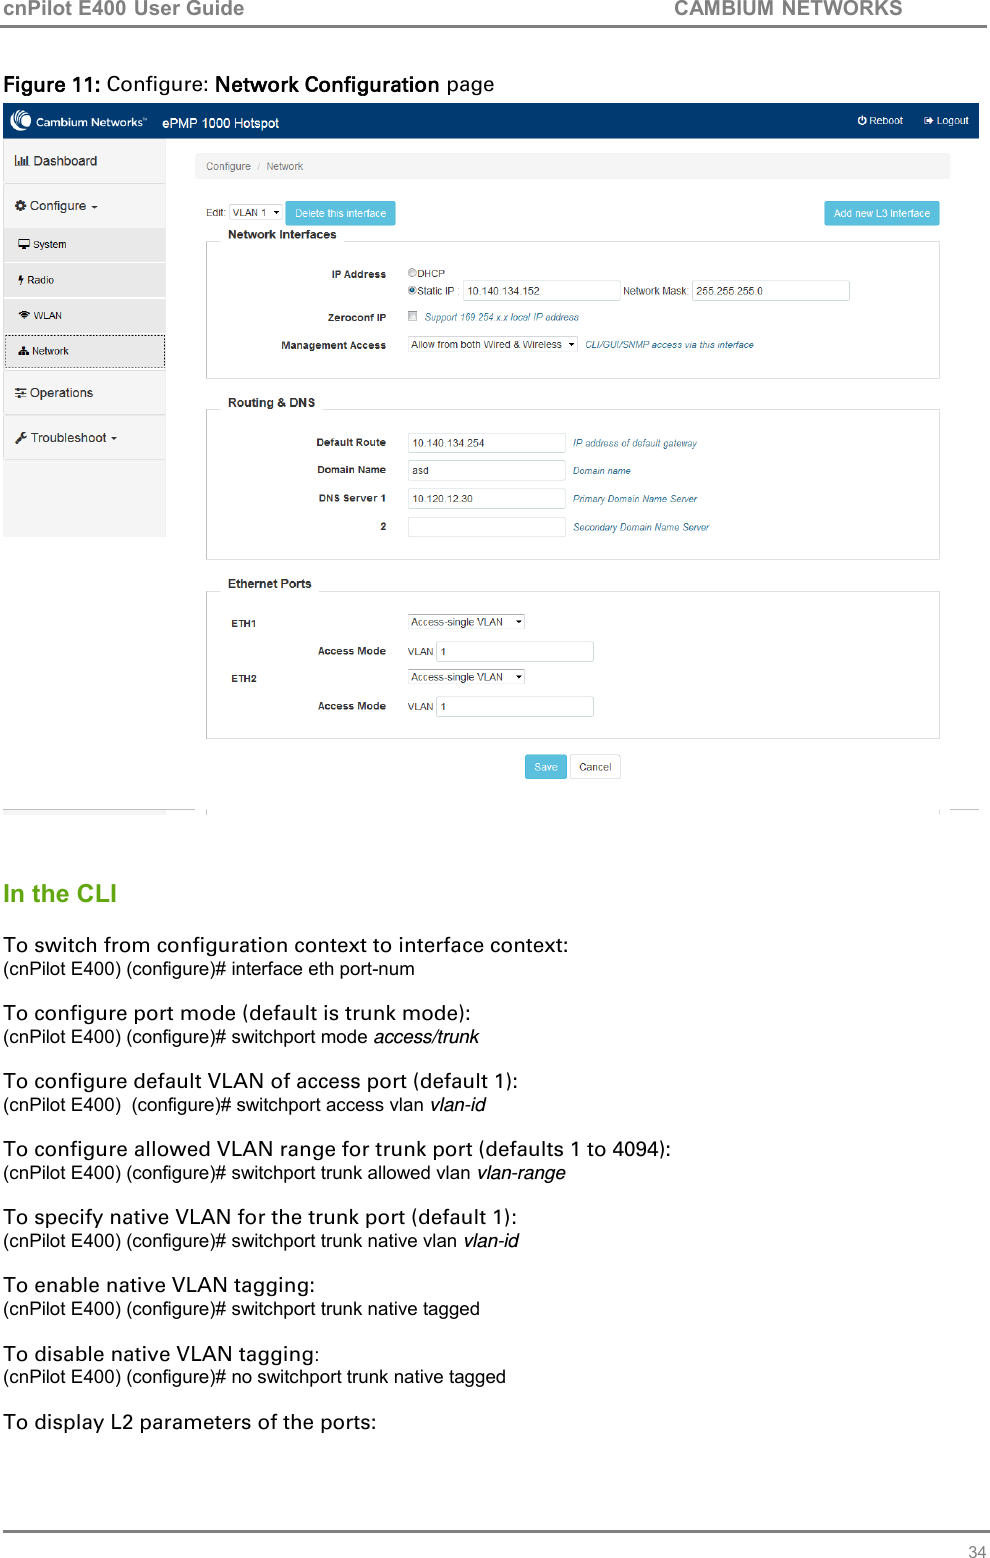 cnPilot E400 User Guide           CAMBIUM NETWORKS   34 Figure 11: Configure: Network Configuration page    In the CLI  To switch from configuration context to interface context: (cnPilot E400) (configure)# interface eth port-num  To configure port mode (default is trunk mode): (cnPilot E400) (configure)# switchport mode access/trunk  To configure default VLAN of access port (default 1): (cnPilot E400)  (configure)# switchport access vlan vlan-id  To configure allowed VLAN range for trunk port (defaults 1 to 4094): (cnPilot E400) (configure)# switchport trunk allowed vlan vlan-range  To specify native VLAN for the trunk port (default 1): (cnPilot E400) (configure)# switchport trunk native vlan vlan-id  To enable native VLAN tagging: (cnPilot E400) (configure)# switchport trunk native tagged  To disable native VLAN tagging: (cnPilot E400) (configure)# no switchport trunk native tagged  To display L2 parameters of the ports: 